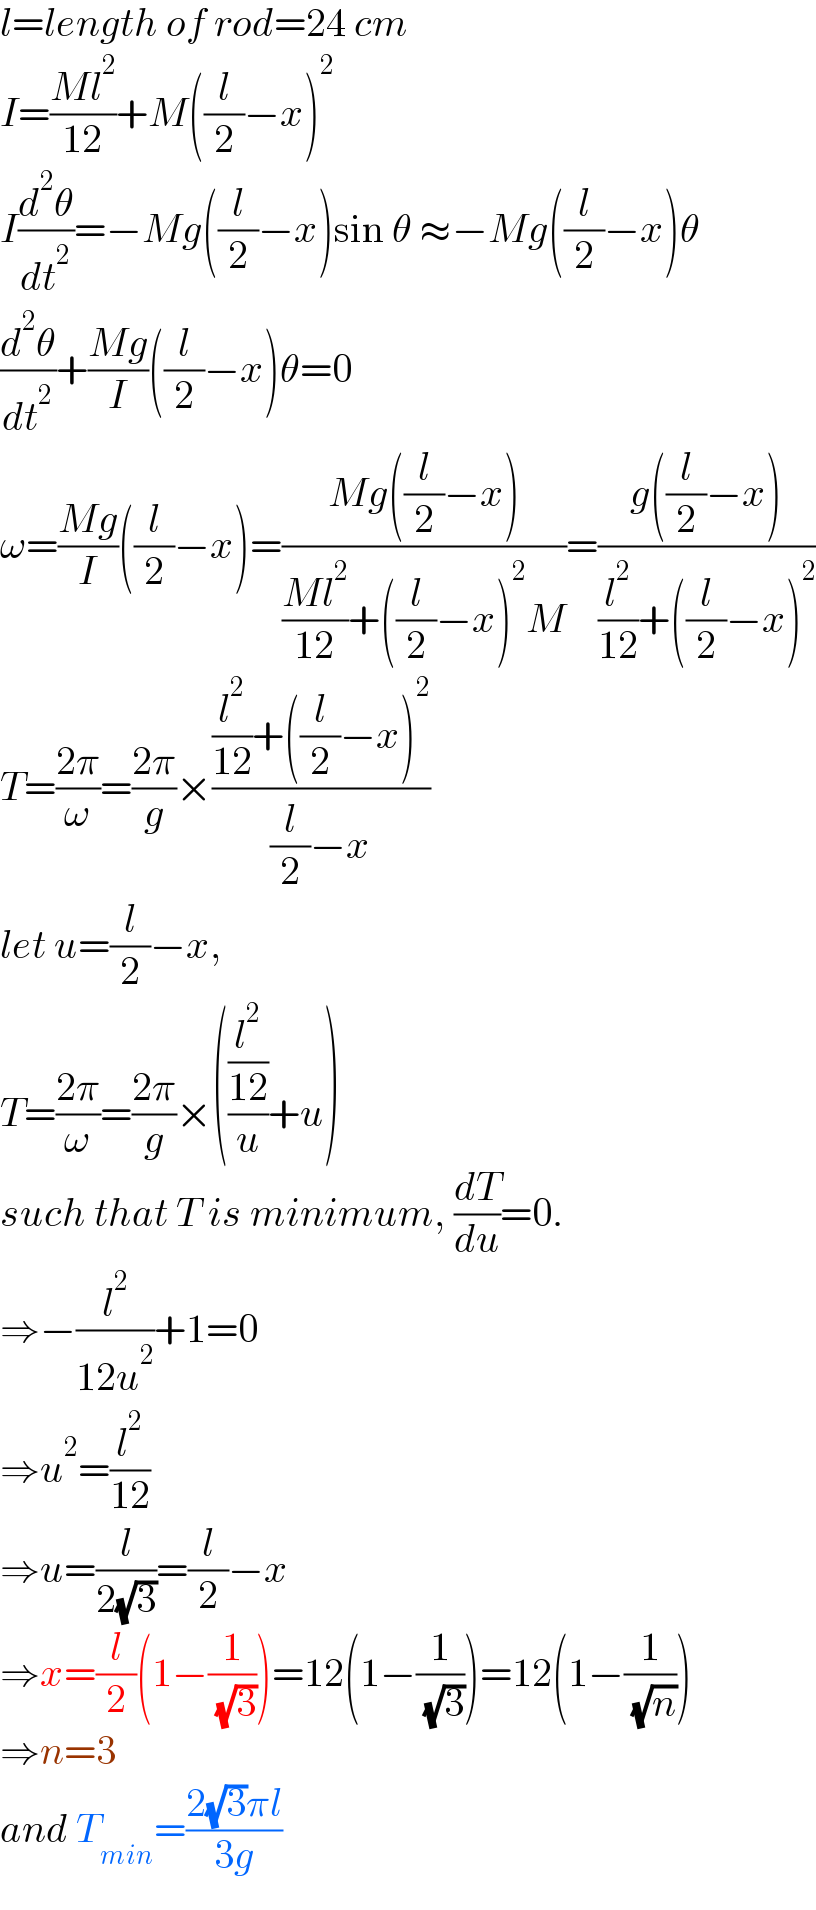 l=length of rod=24 cm  I=((Ml^2 )/(12))+M((l/2)−x)^2   I(d^2 θ/dt^2 )=−Mg((l/2)−x)sin θ ≈−Mg((l/2)−x)θ  (d^2 θ/dt^2 )+((Mg)/I)((l/2)−x)θ=0  ω=((Mg)/I)((l/2)−x)=((Mg((l/2)−x))/(((Ml^2 )/(12))+((l/2)−x)^2 M))=((g((l/2)−x))/((l^2 /(12))+((l/2)−x)^2 ))  T=((2π)/ω)=((2π)/g)×(((l^2 /(12))+((l/2)−x)^2 )/((l/2)−x))  let u=(l/2)−x,  T=((2π)/ω)=((2π)/g)×(((l^2 /(12))/u)+u)  such that T is minimum, (dT/du)=0.  ⇒−(l^2 /(12u^2 ))+1=0  ⇒u^2 =(l^2 /(12))  ⇒u=(l/(2(√3)))=(l/2)−x  ⇒x=(l/2)(1−(1/( (√3))))=12(1−(1/( (√3))))=12(1−(1/( (√n))))  ⇒n=3  and T_(min) =((2(√3)πl)/(3g))  